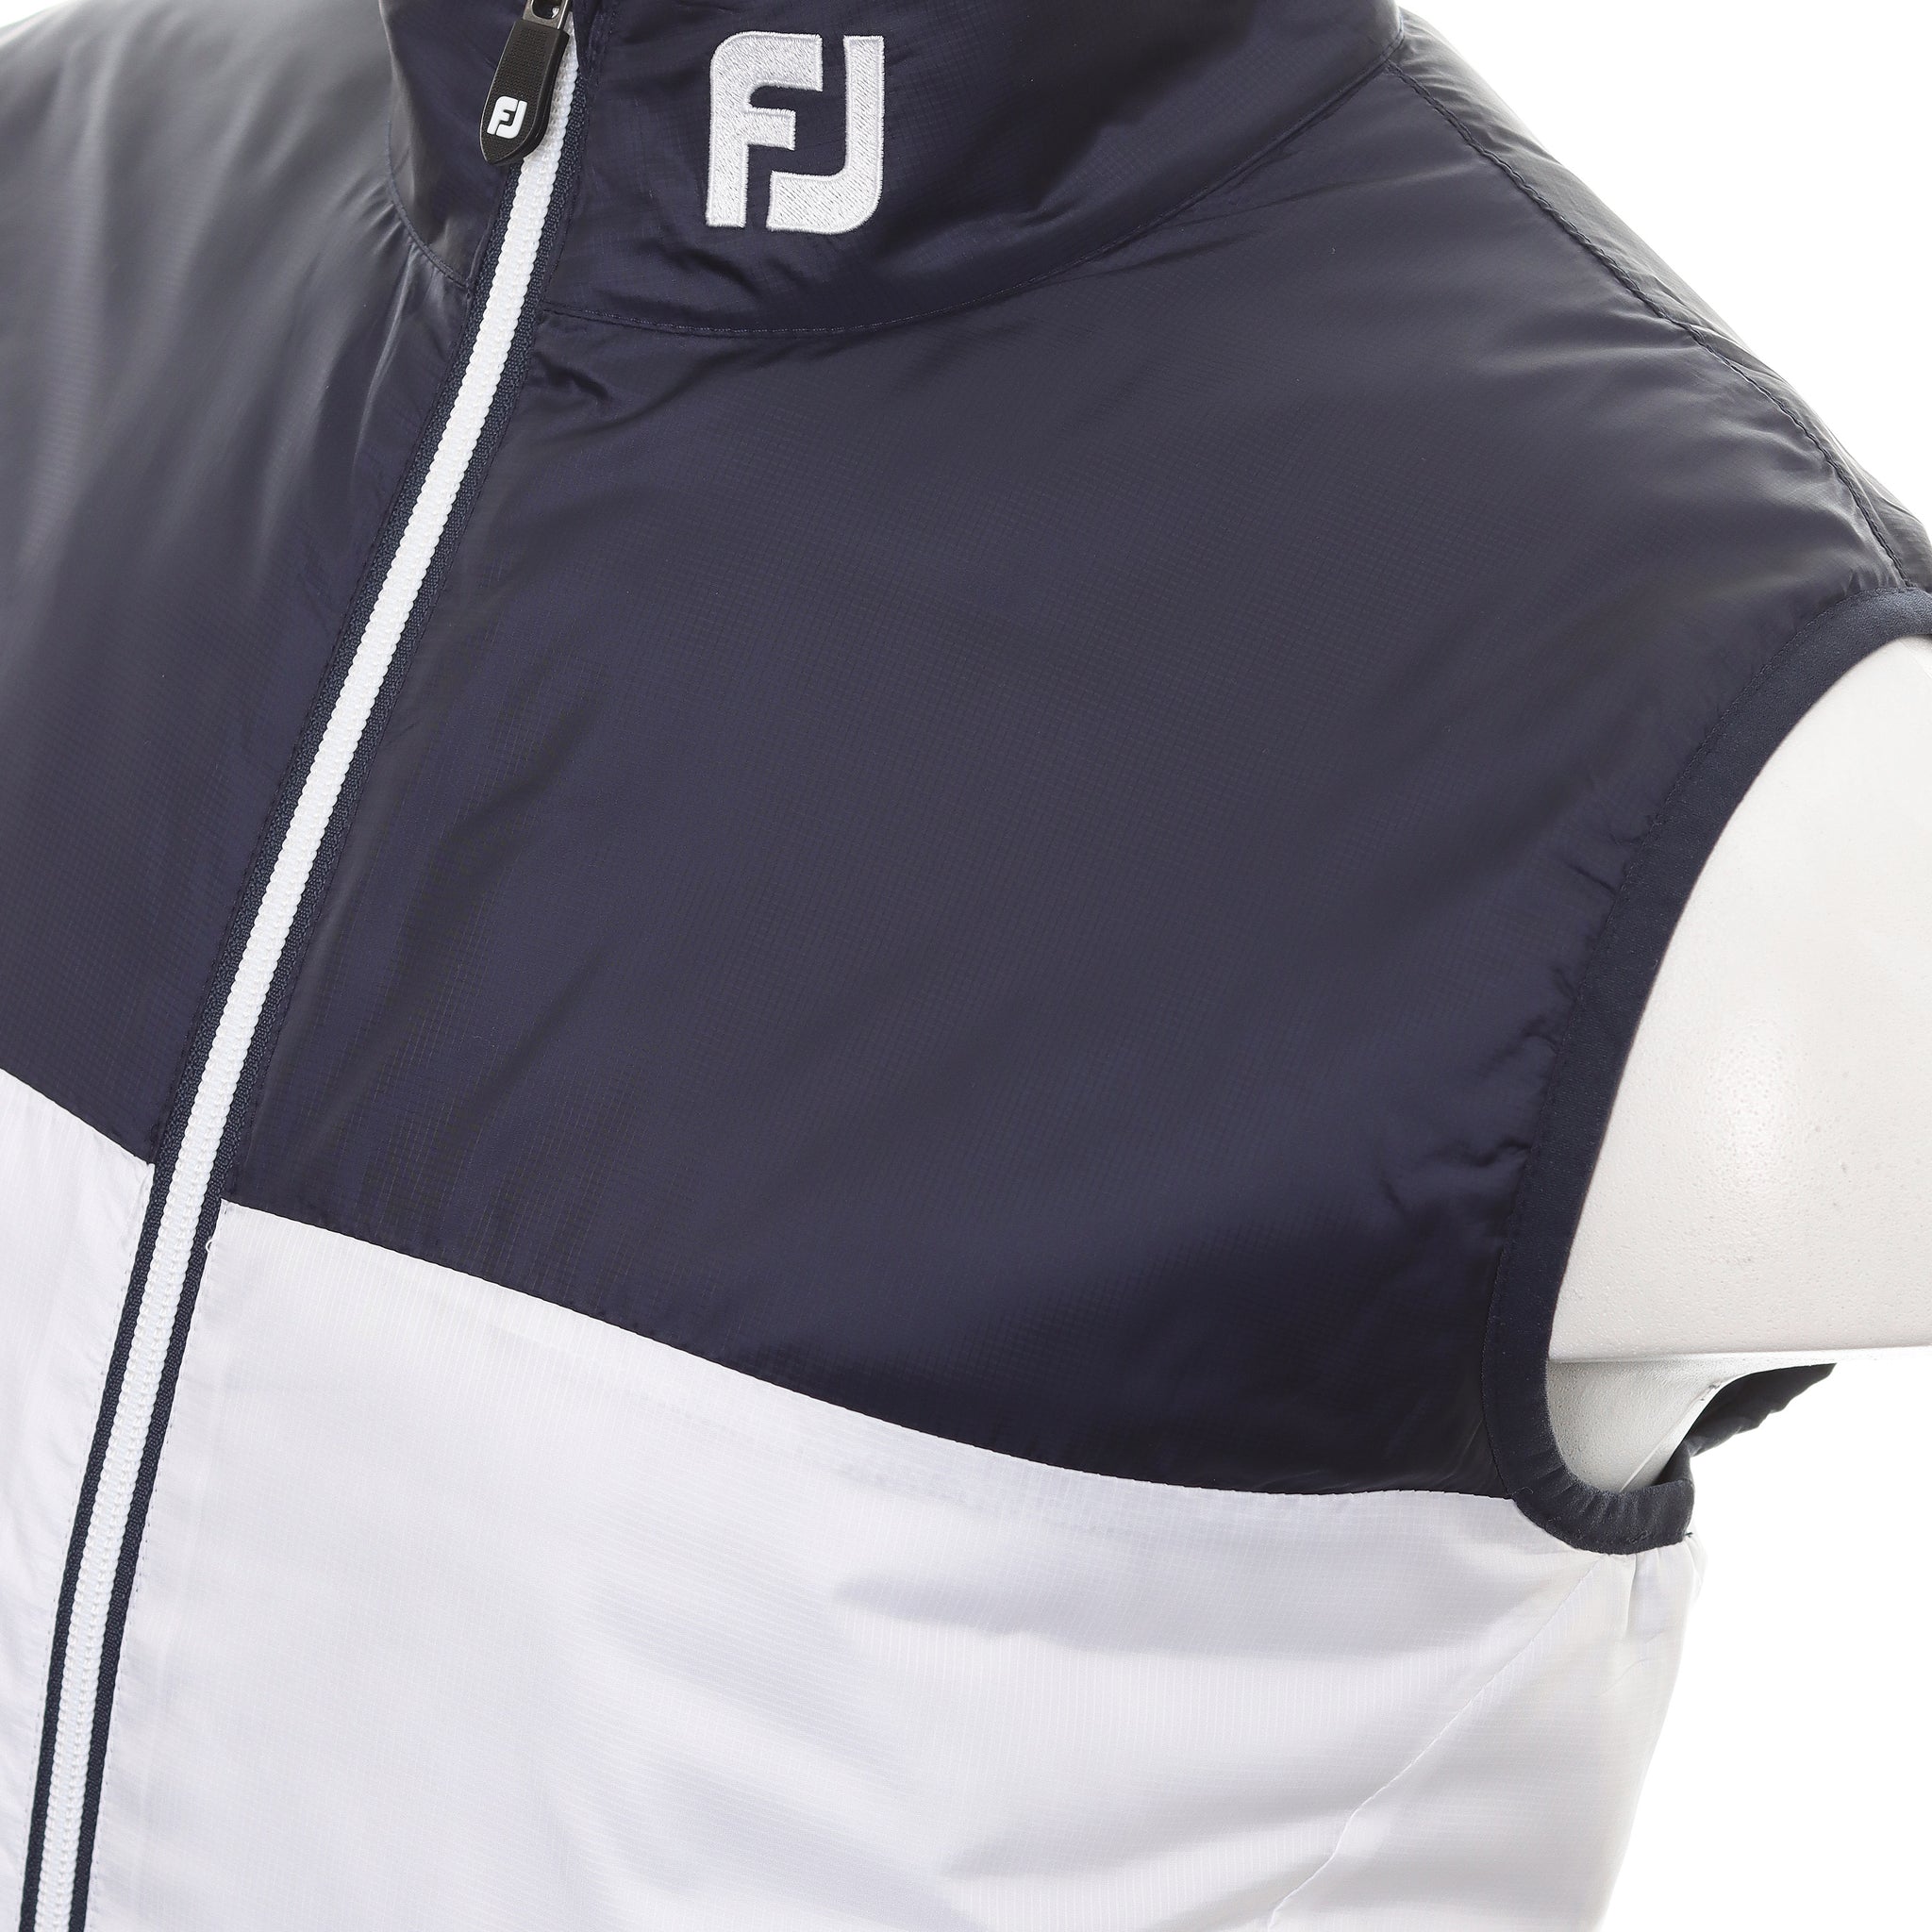 footjoy-lightweight-thermal-insulated-vest-84432-navy-white